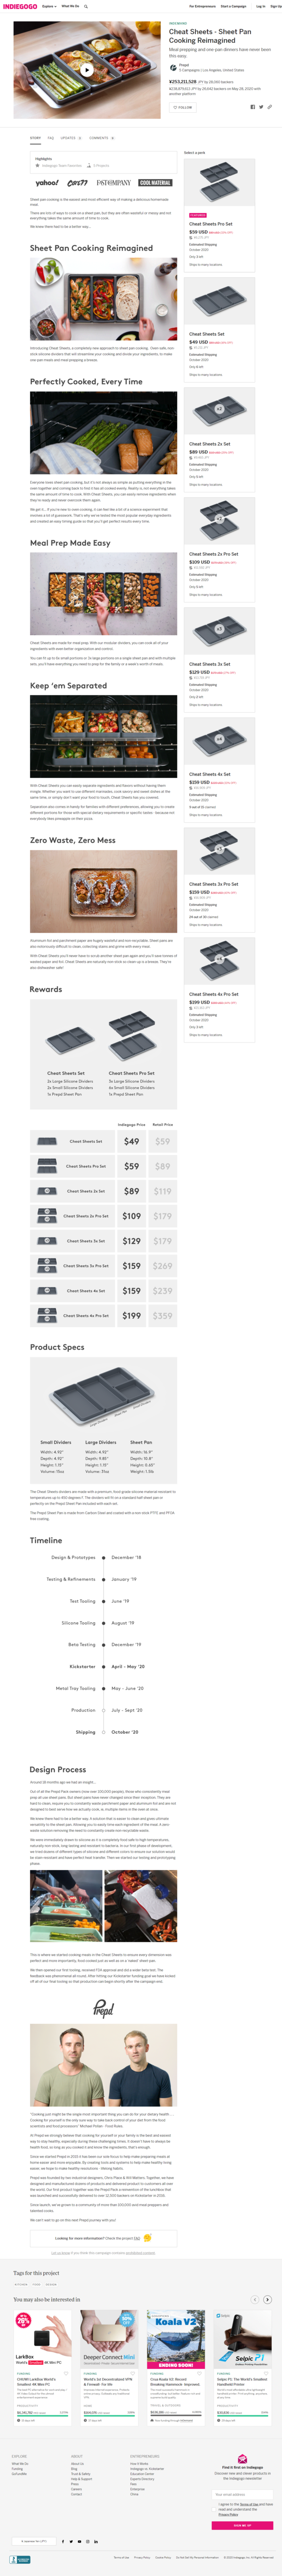 Cheat Sheets - Sheet Pan Cooking Reimagined   Indiegogo.png